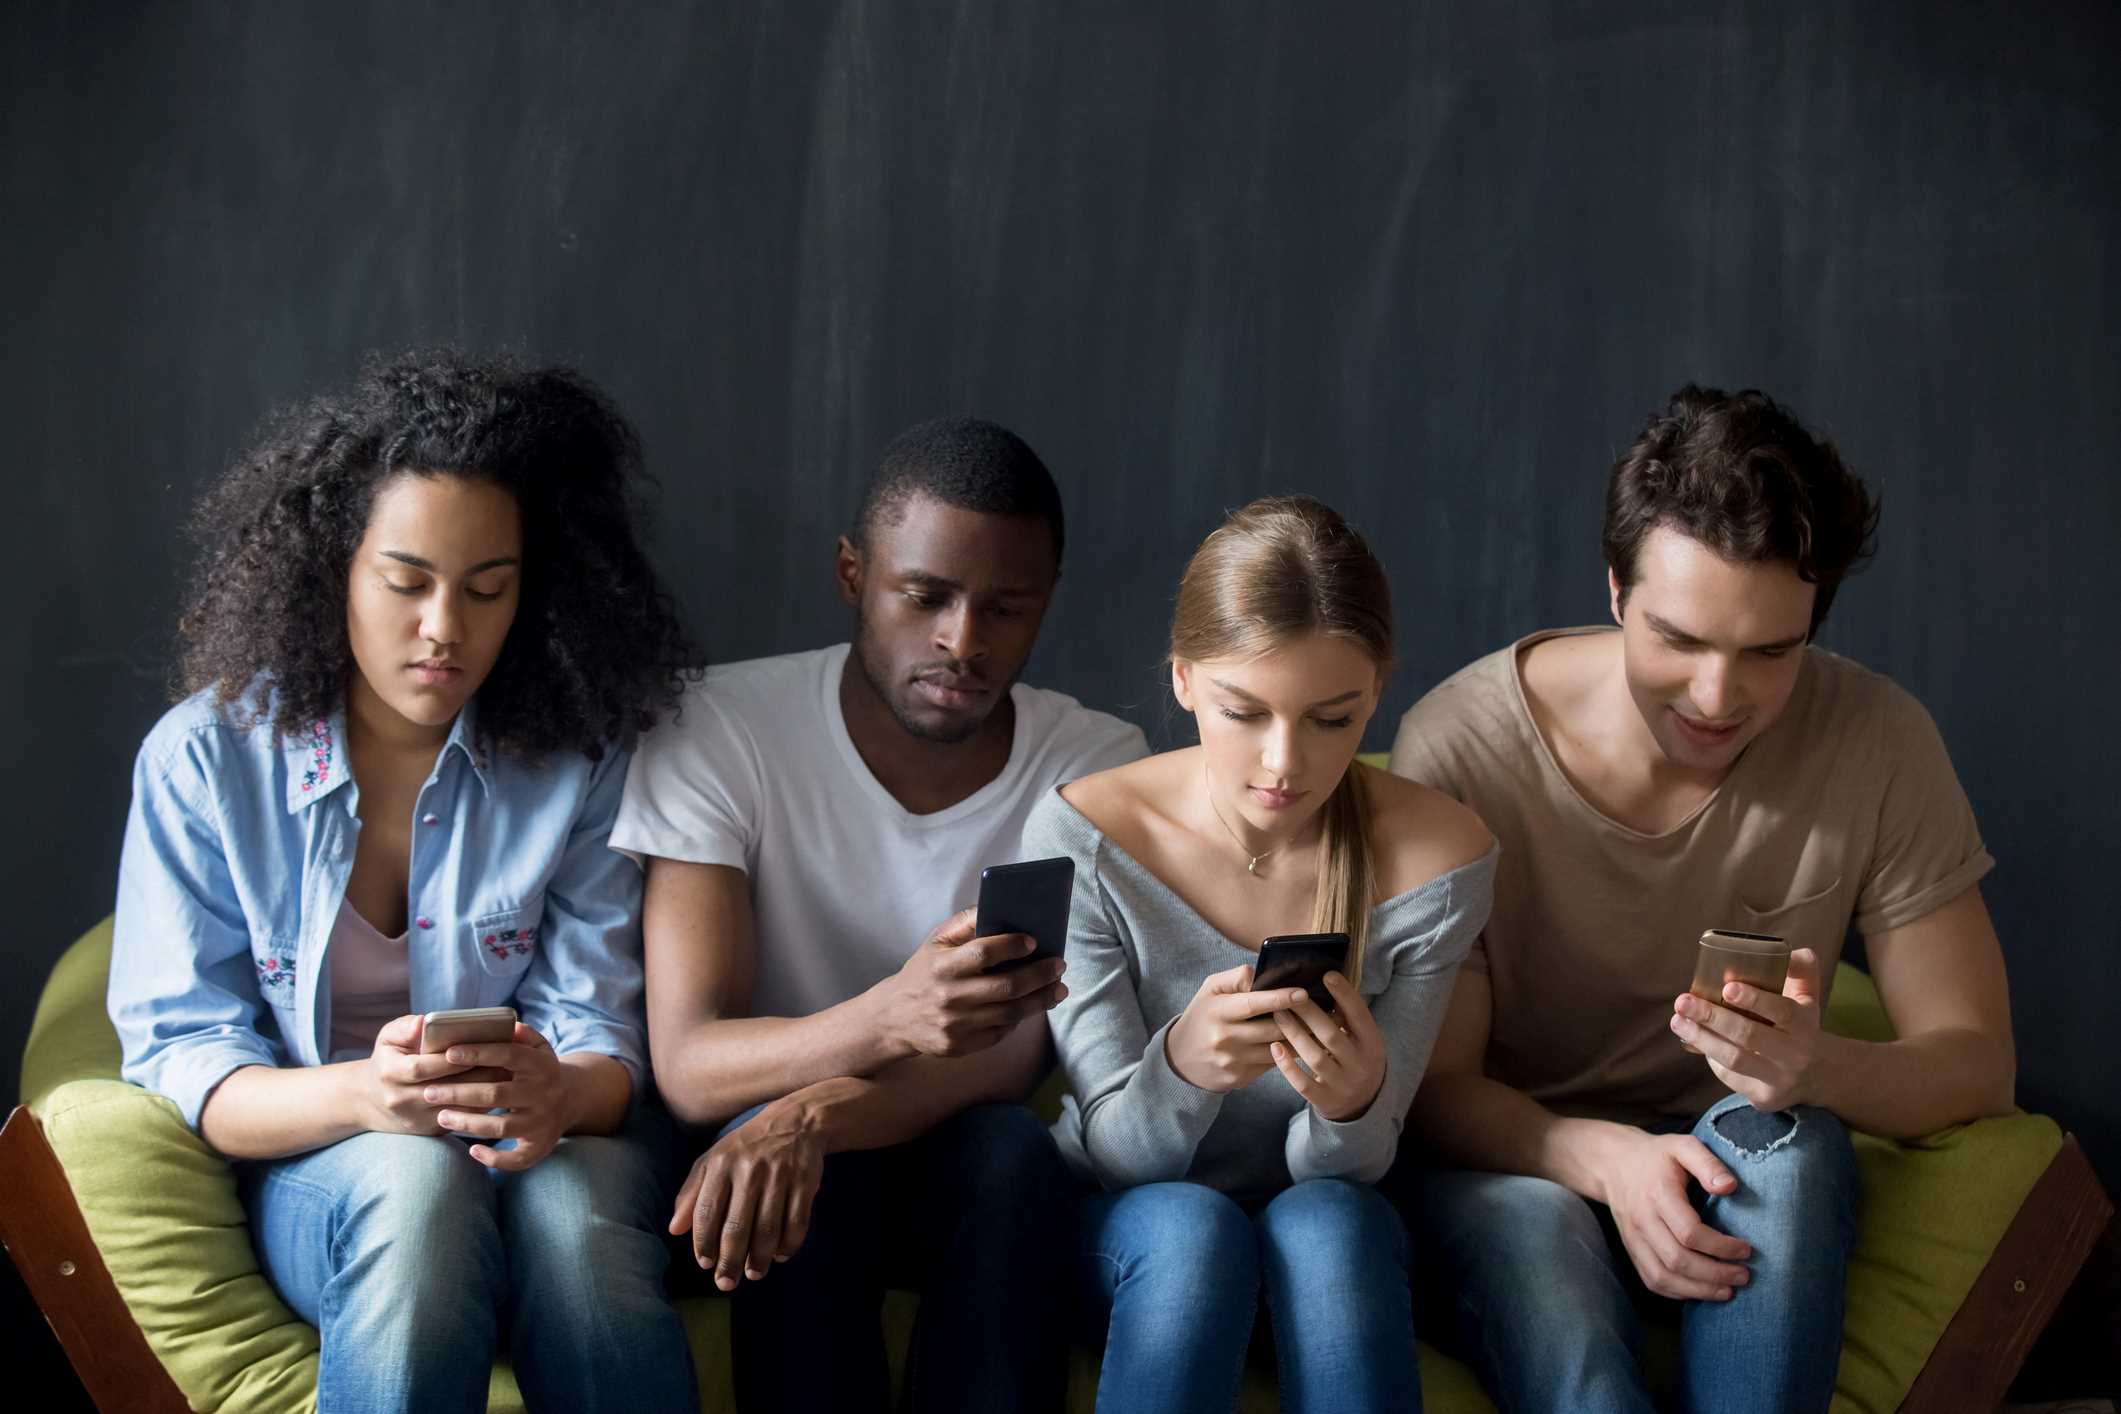 4 young people sitting on a sofa and looking at their mobile phone screens.